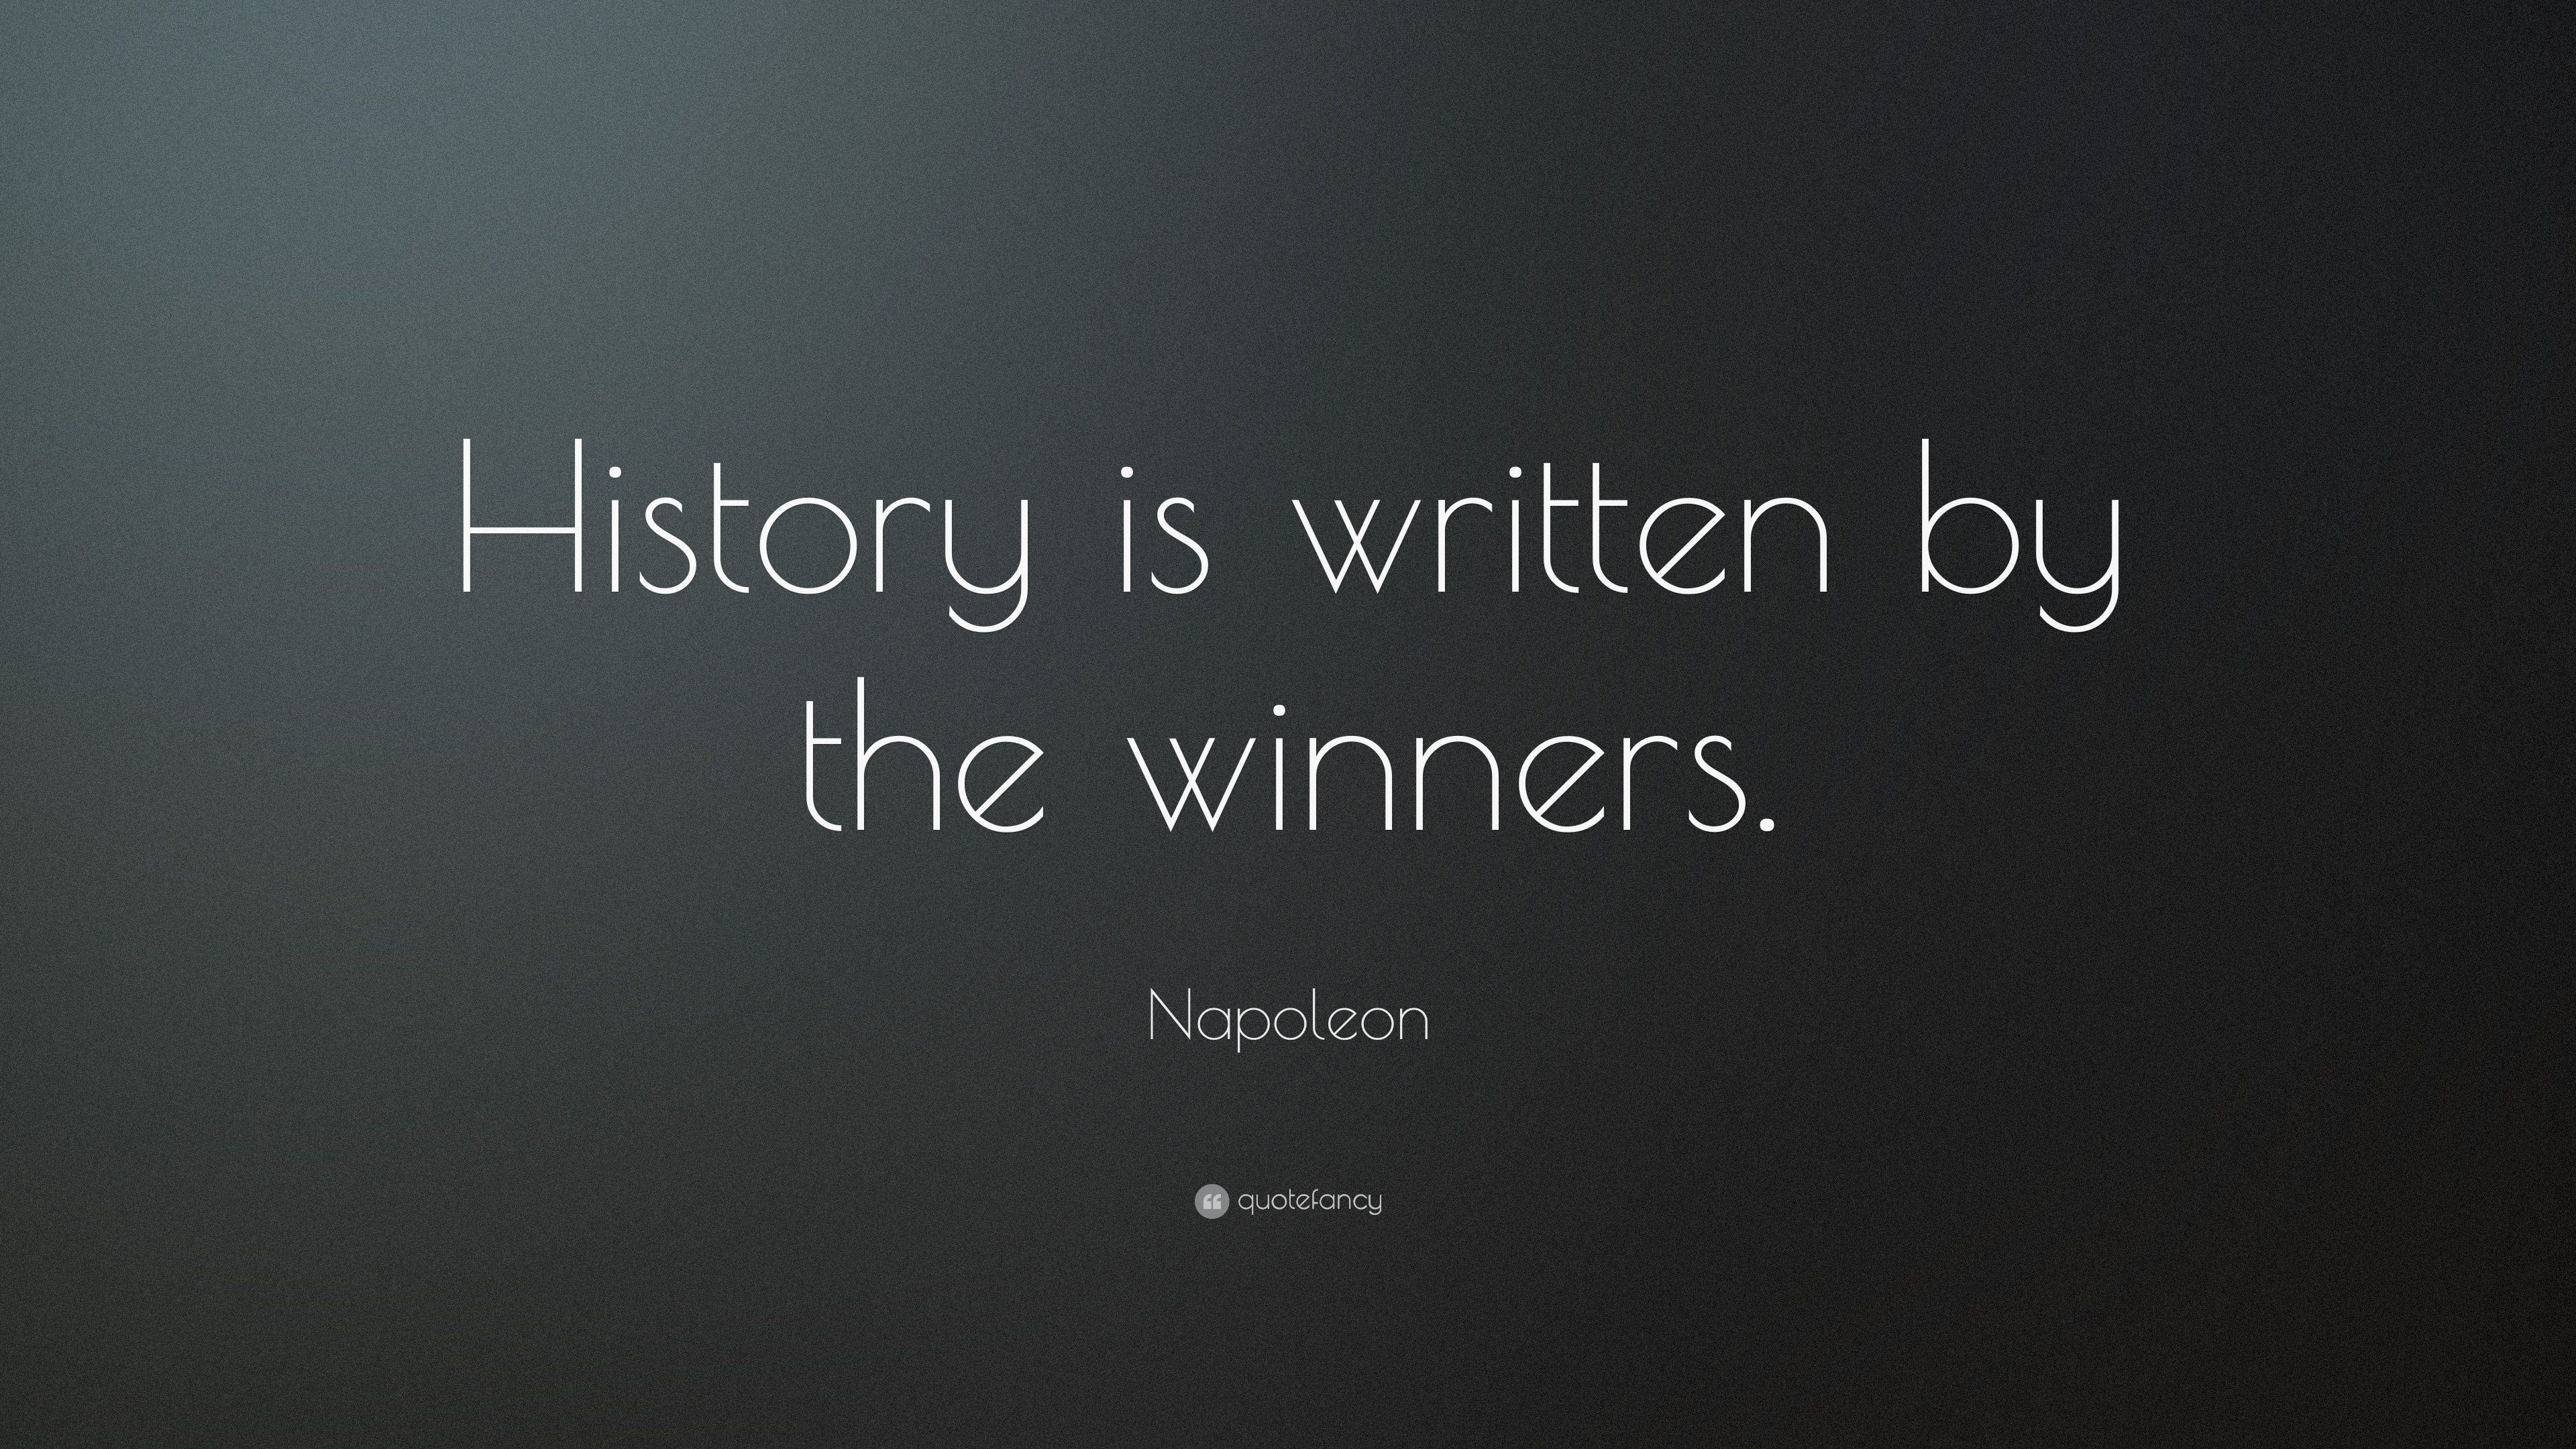 Napoleon Quote: “History is written by the winners.” 22 wallpaper